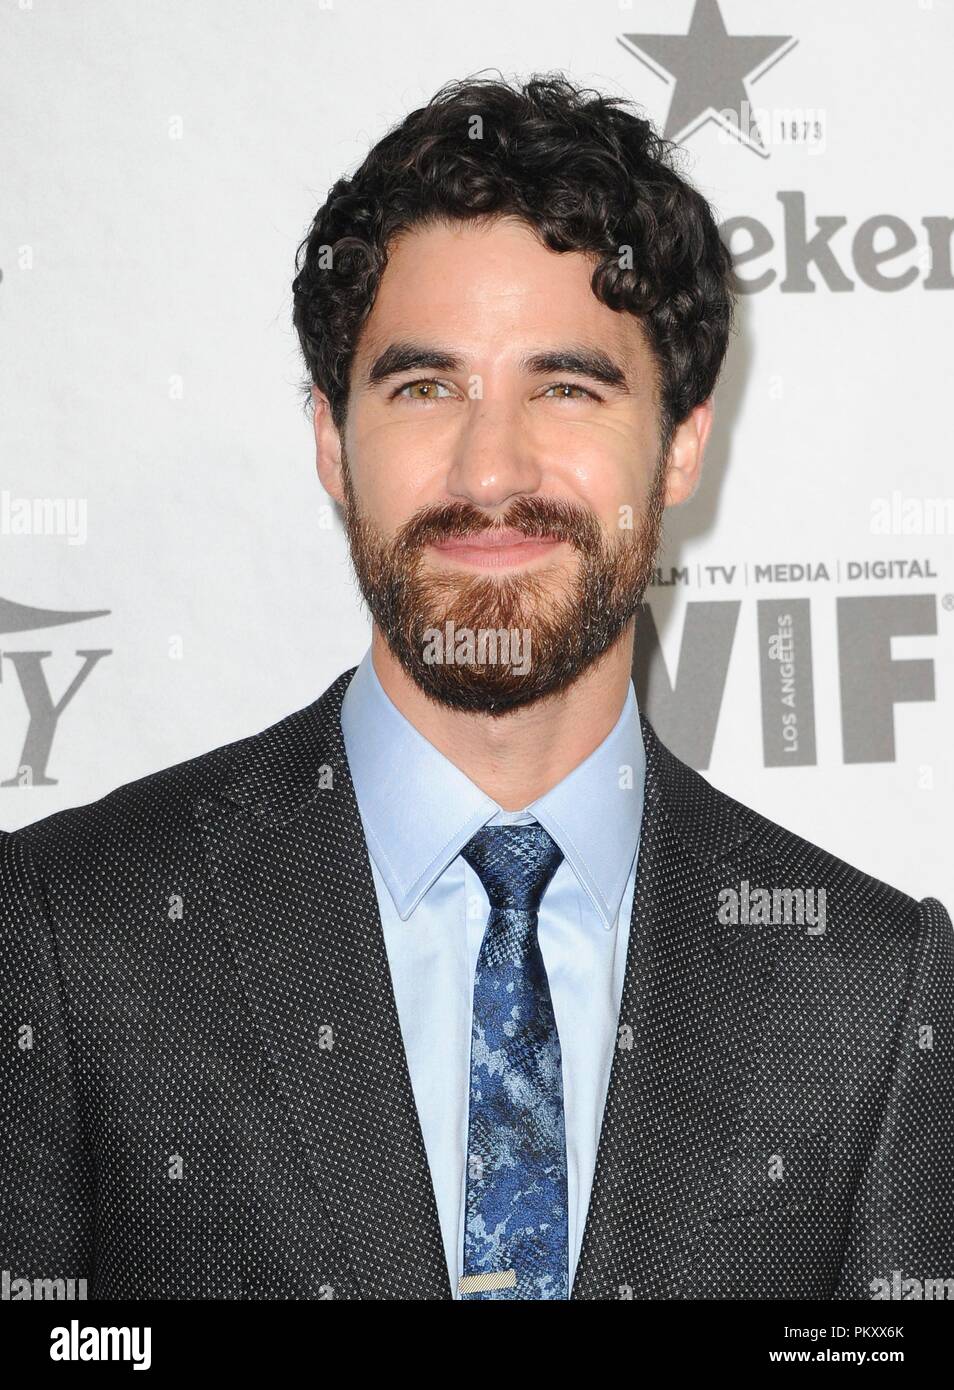 West Hollywood, CA. 15th Sep, 2018. Darren Criss at arrivals for Variety and Women in Film 2018 Television Nominees Celebration Sponsored by Cadillac and Heineken, Cecconi's, West Hollywood, CA September 15, 2018. Credit: Elizabeth Goodenough/Everett Collection/Alamy Live News Stock Photo